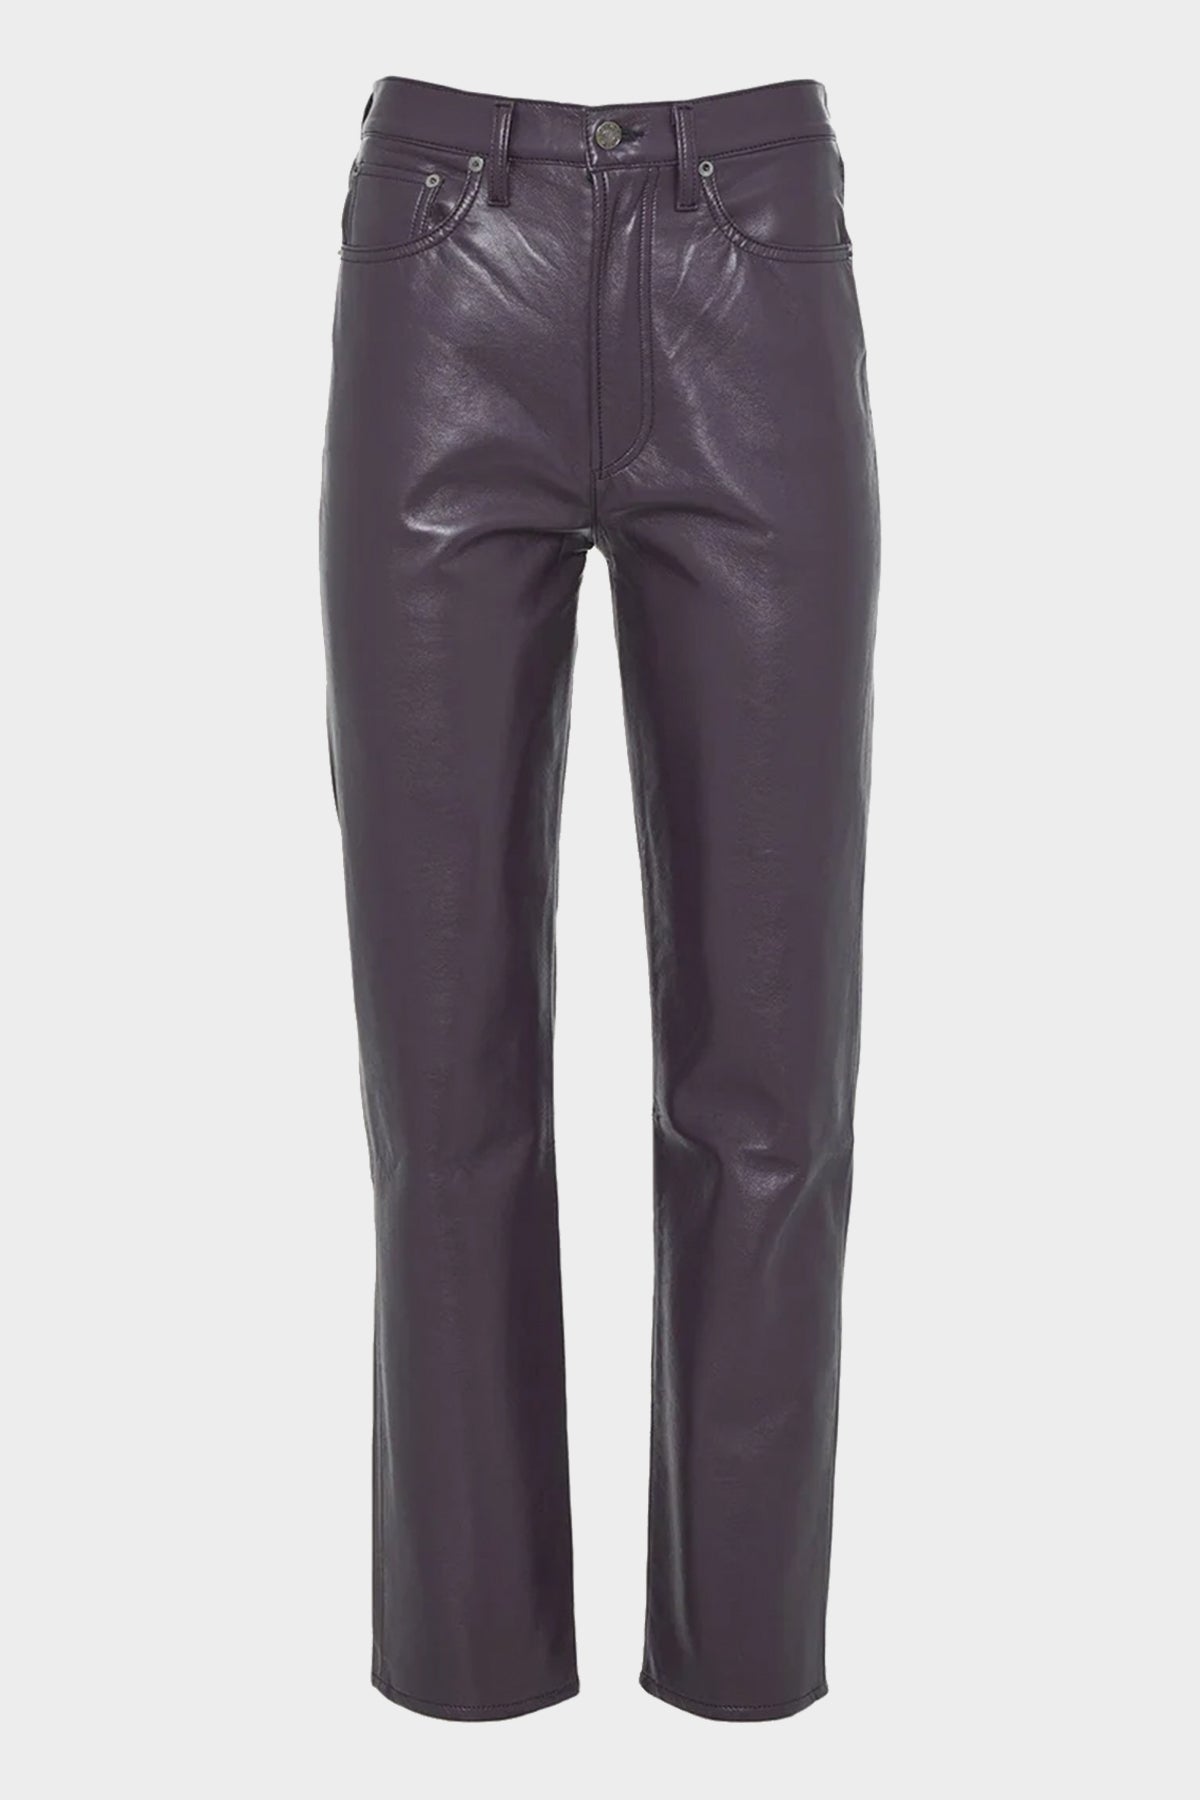 Recycled Leather 90's Pinch Waist Jean in Night Shade - shop-olivia.com